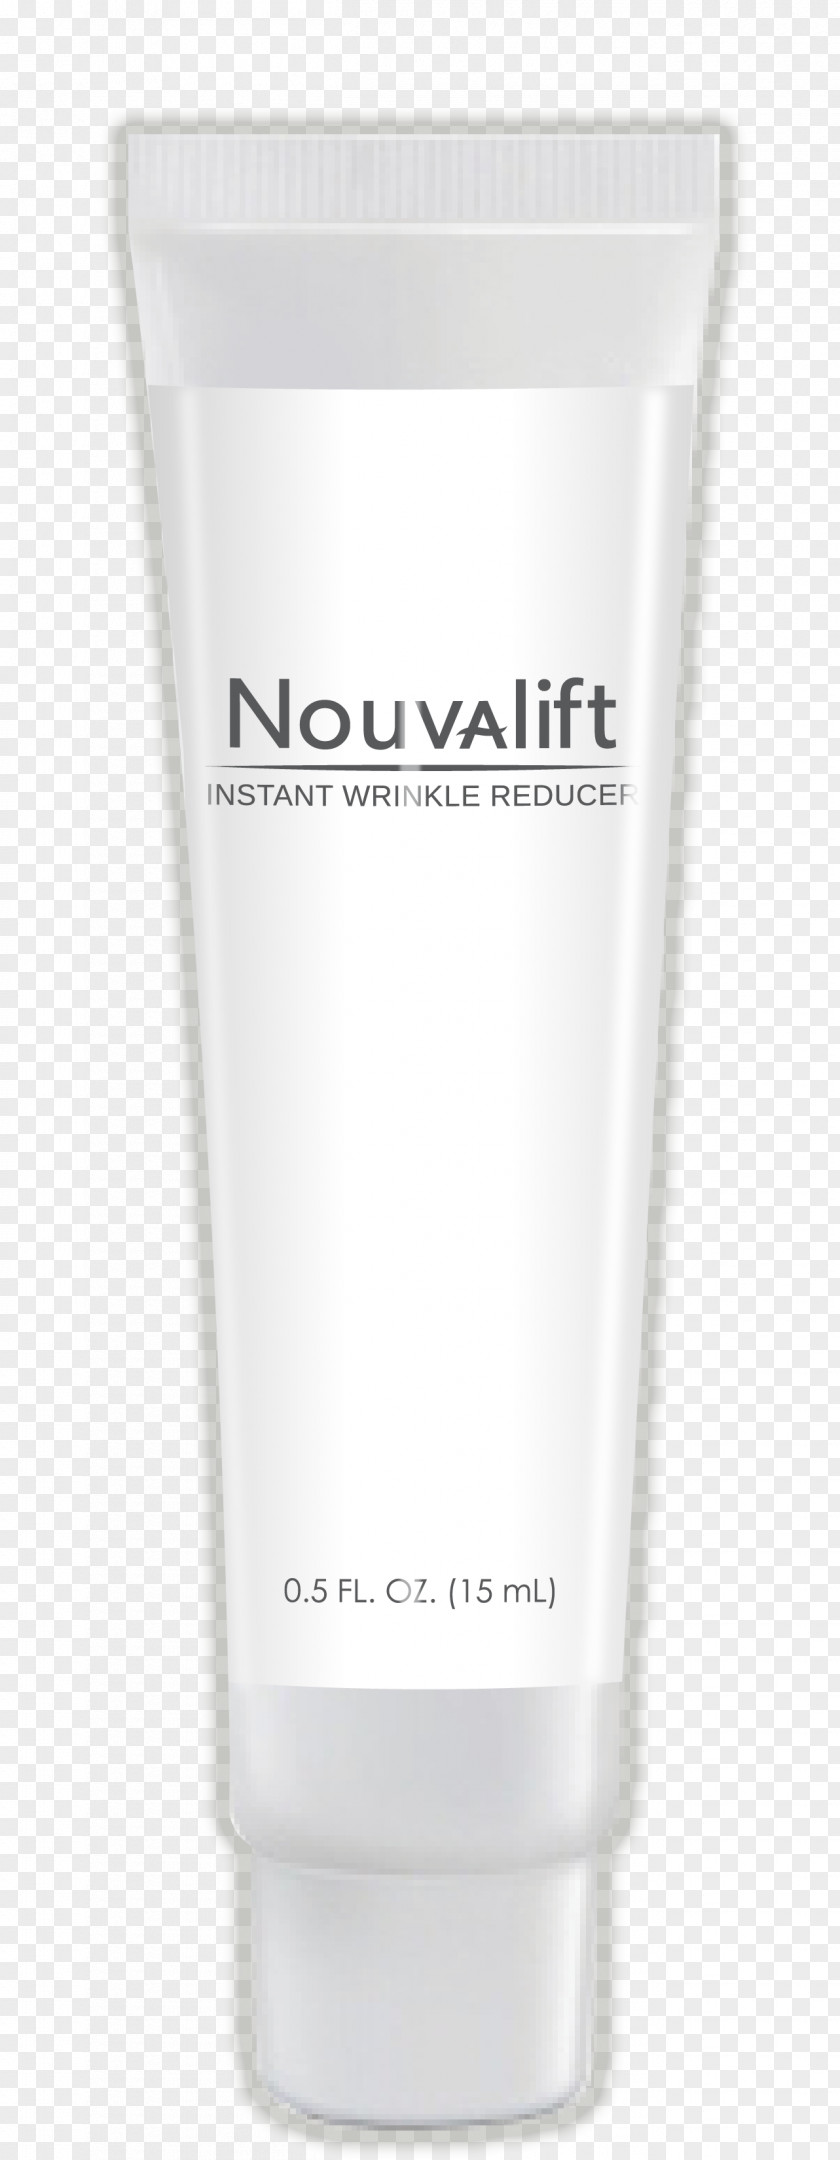 Wrinkle Cream Lotion PNG